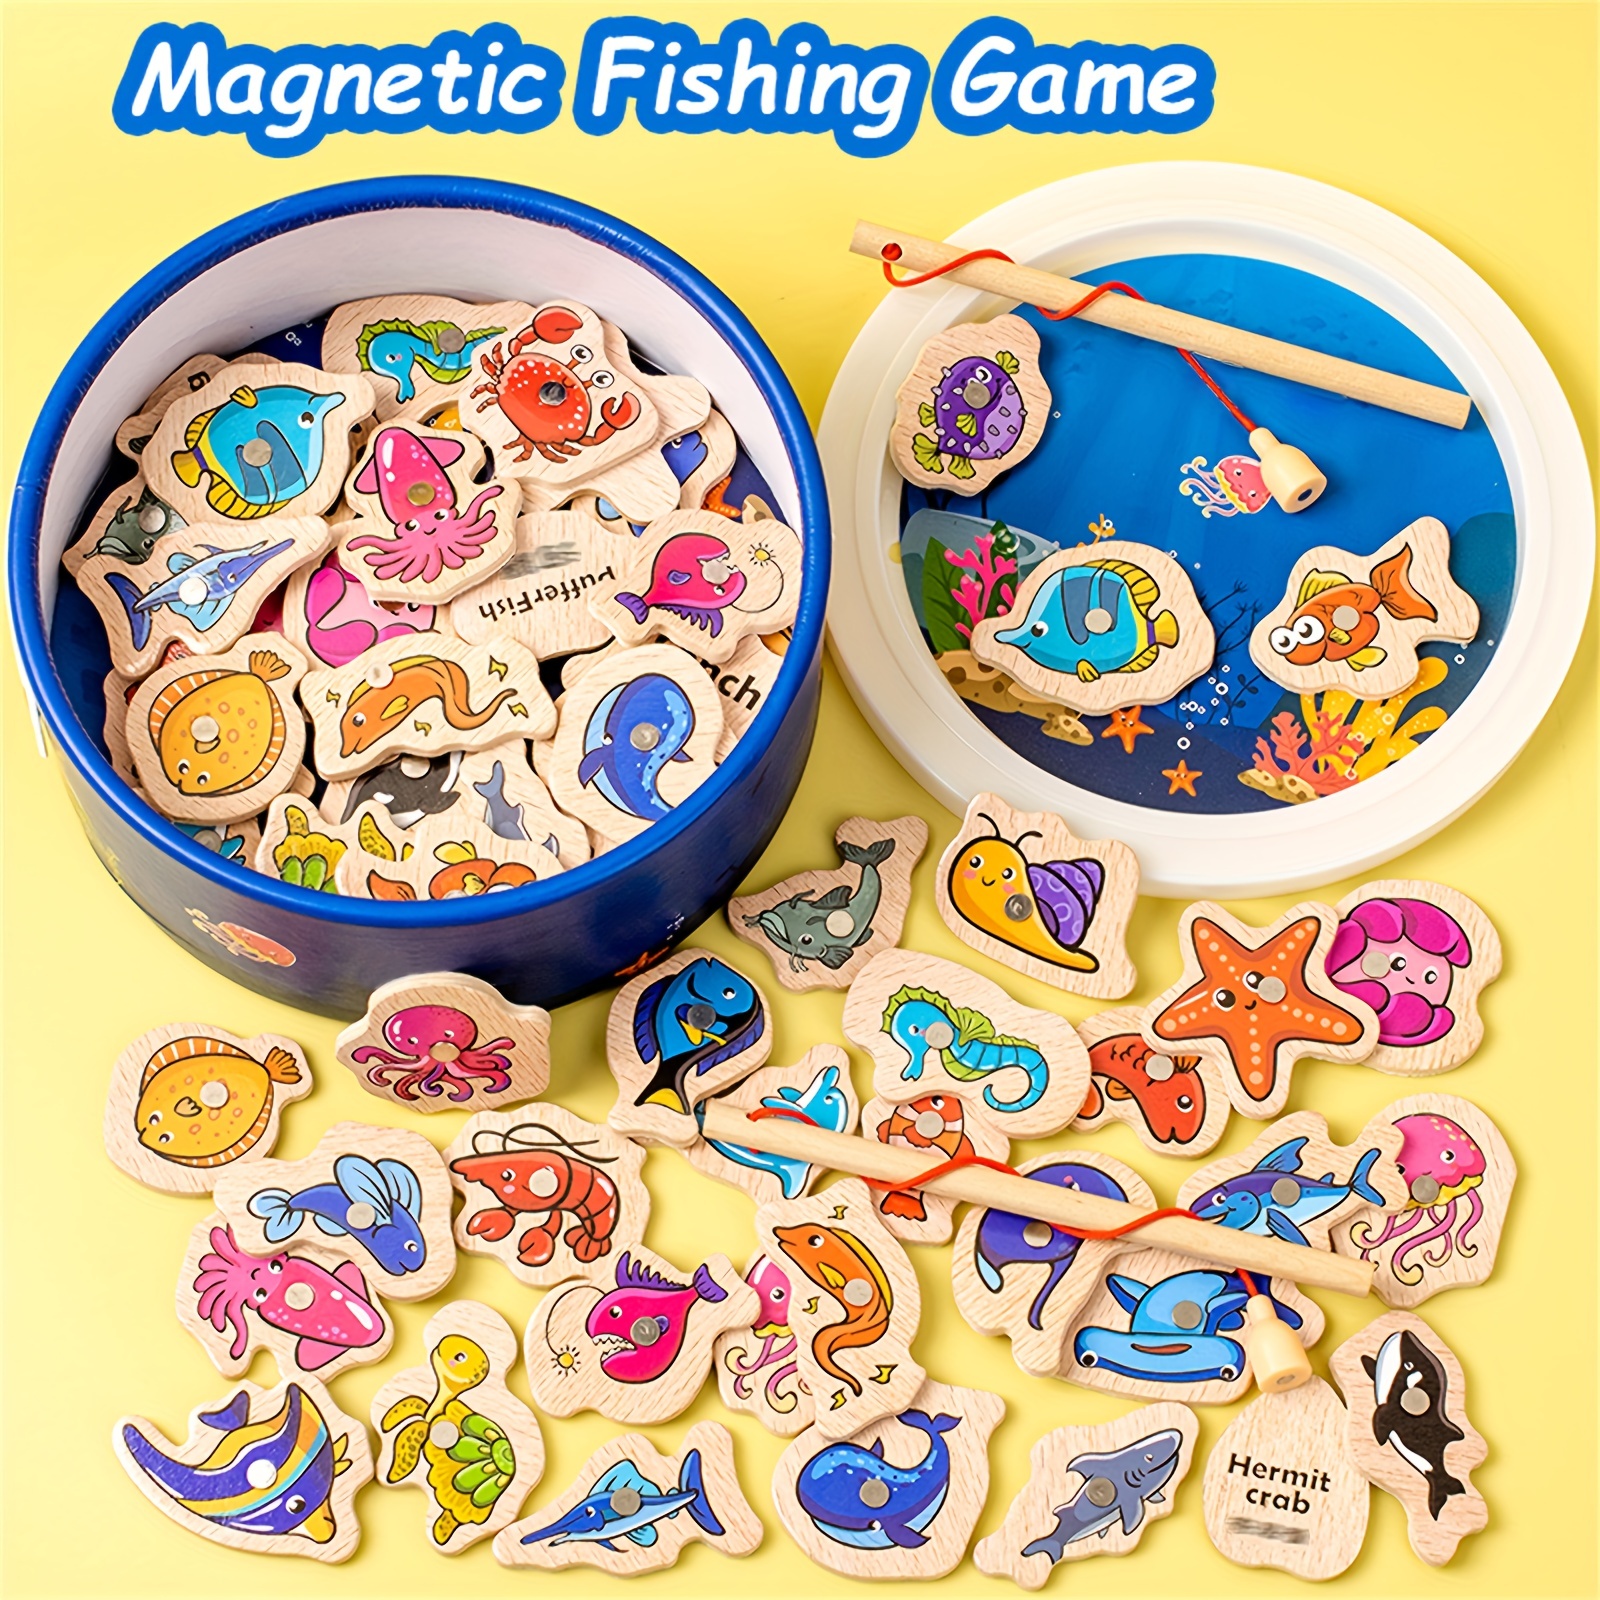 Magnetic Wooden Fishing Game For Kids, Math and Counting Toy Board Games  For Toddlers & Kids Ages 3 4 5 Educational Preschool Montessori STEM  Learning